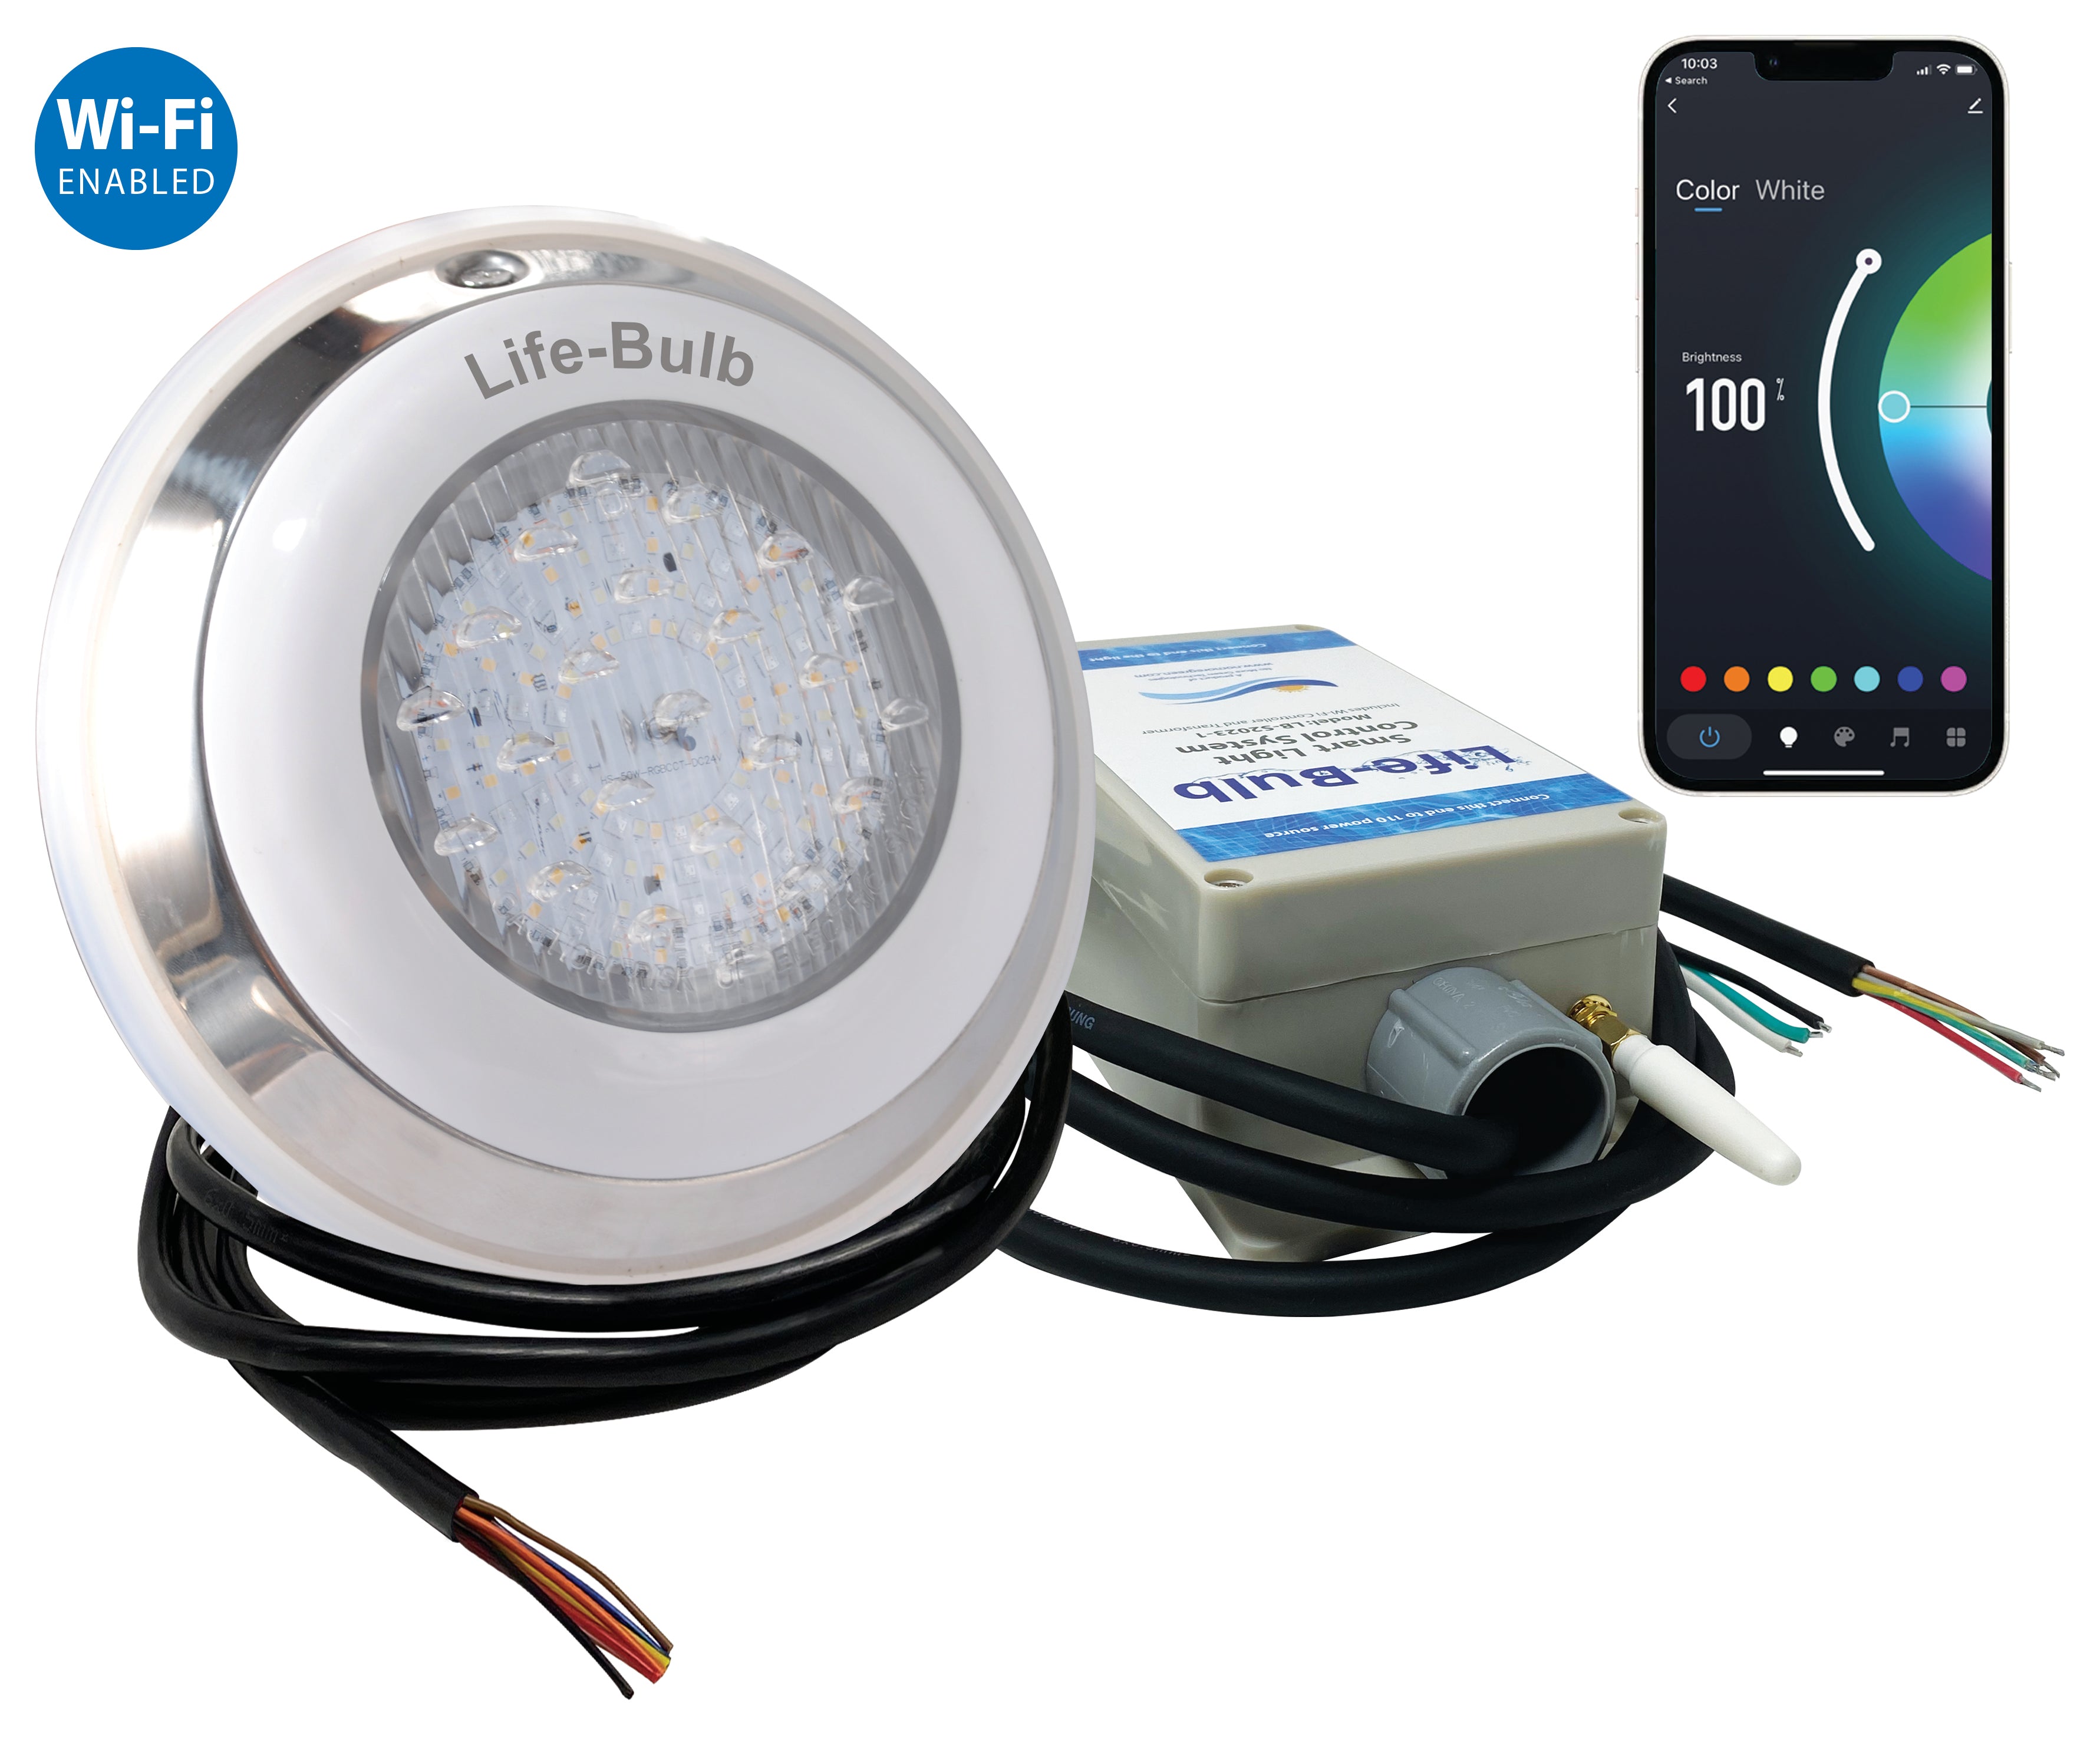 Life-Bulb Smart LED Color Changing Wall Mount Spa Light | Works with Remote or Smartphone App - iOS or Android | Lifetime Replacement Warranty | 75ft Cable